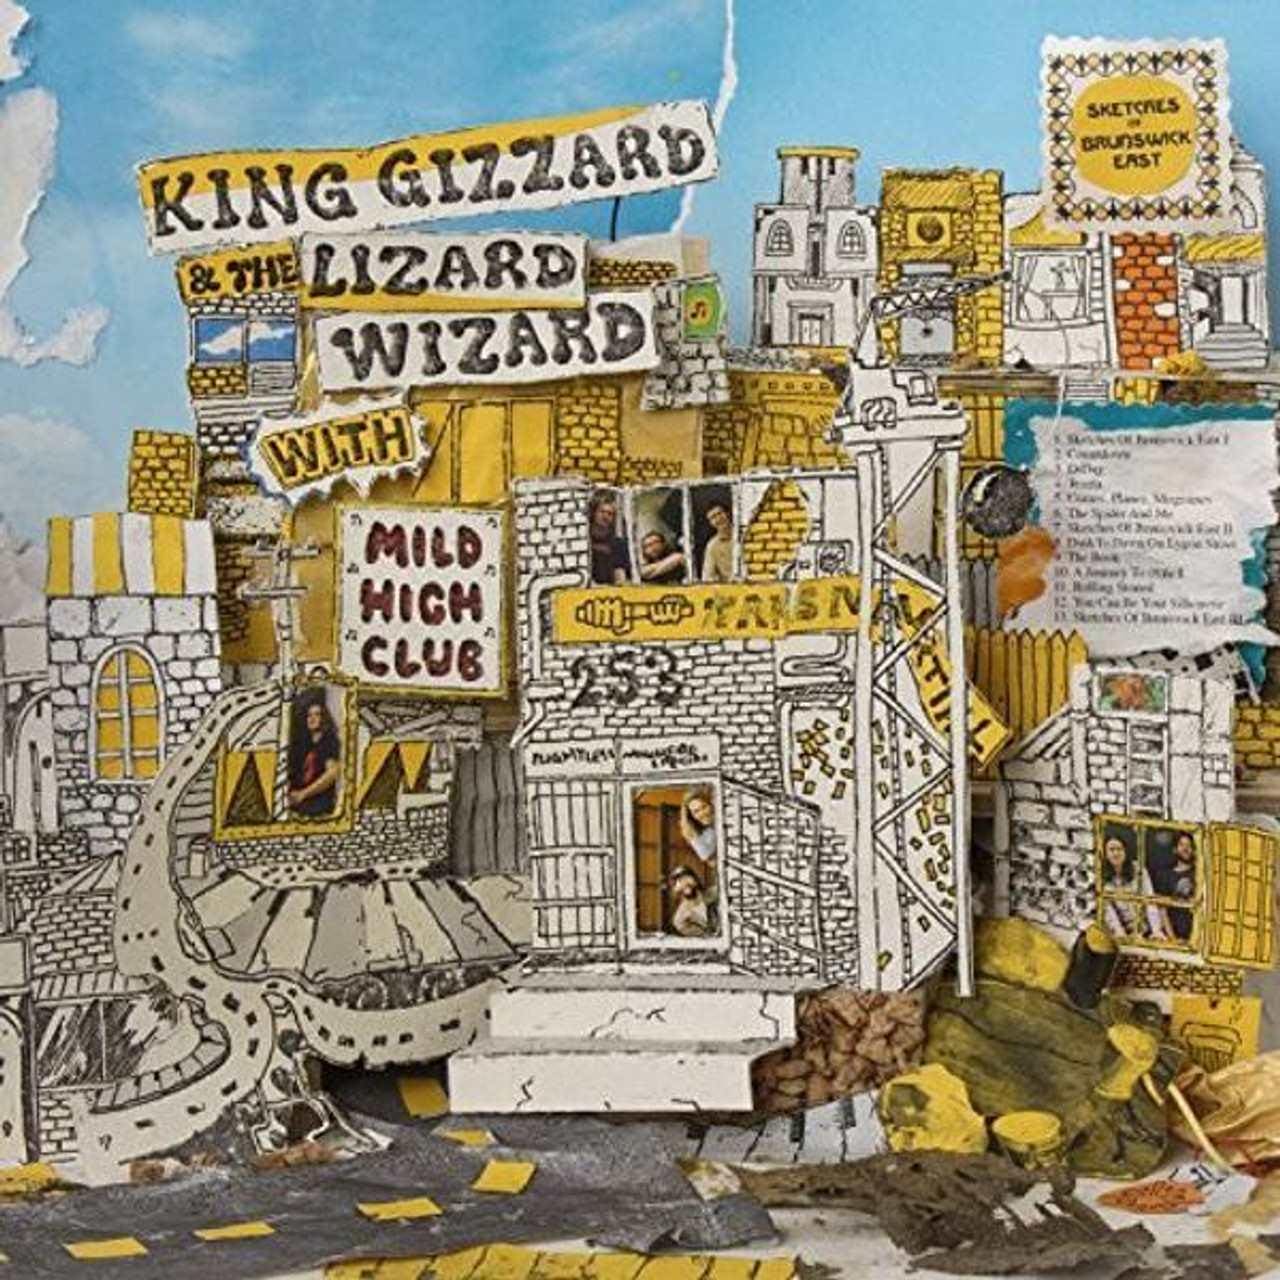 KING GIZZARD AND THE LIZARD WIZARD - Sketches of Brunswick East Vinyl - JWrayRecords